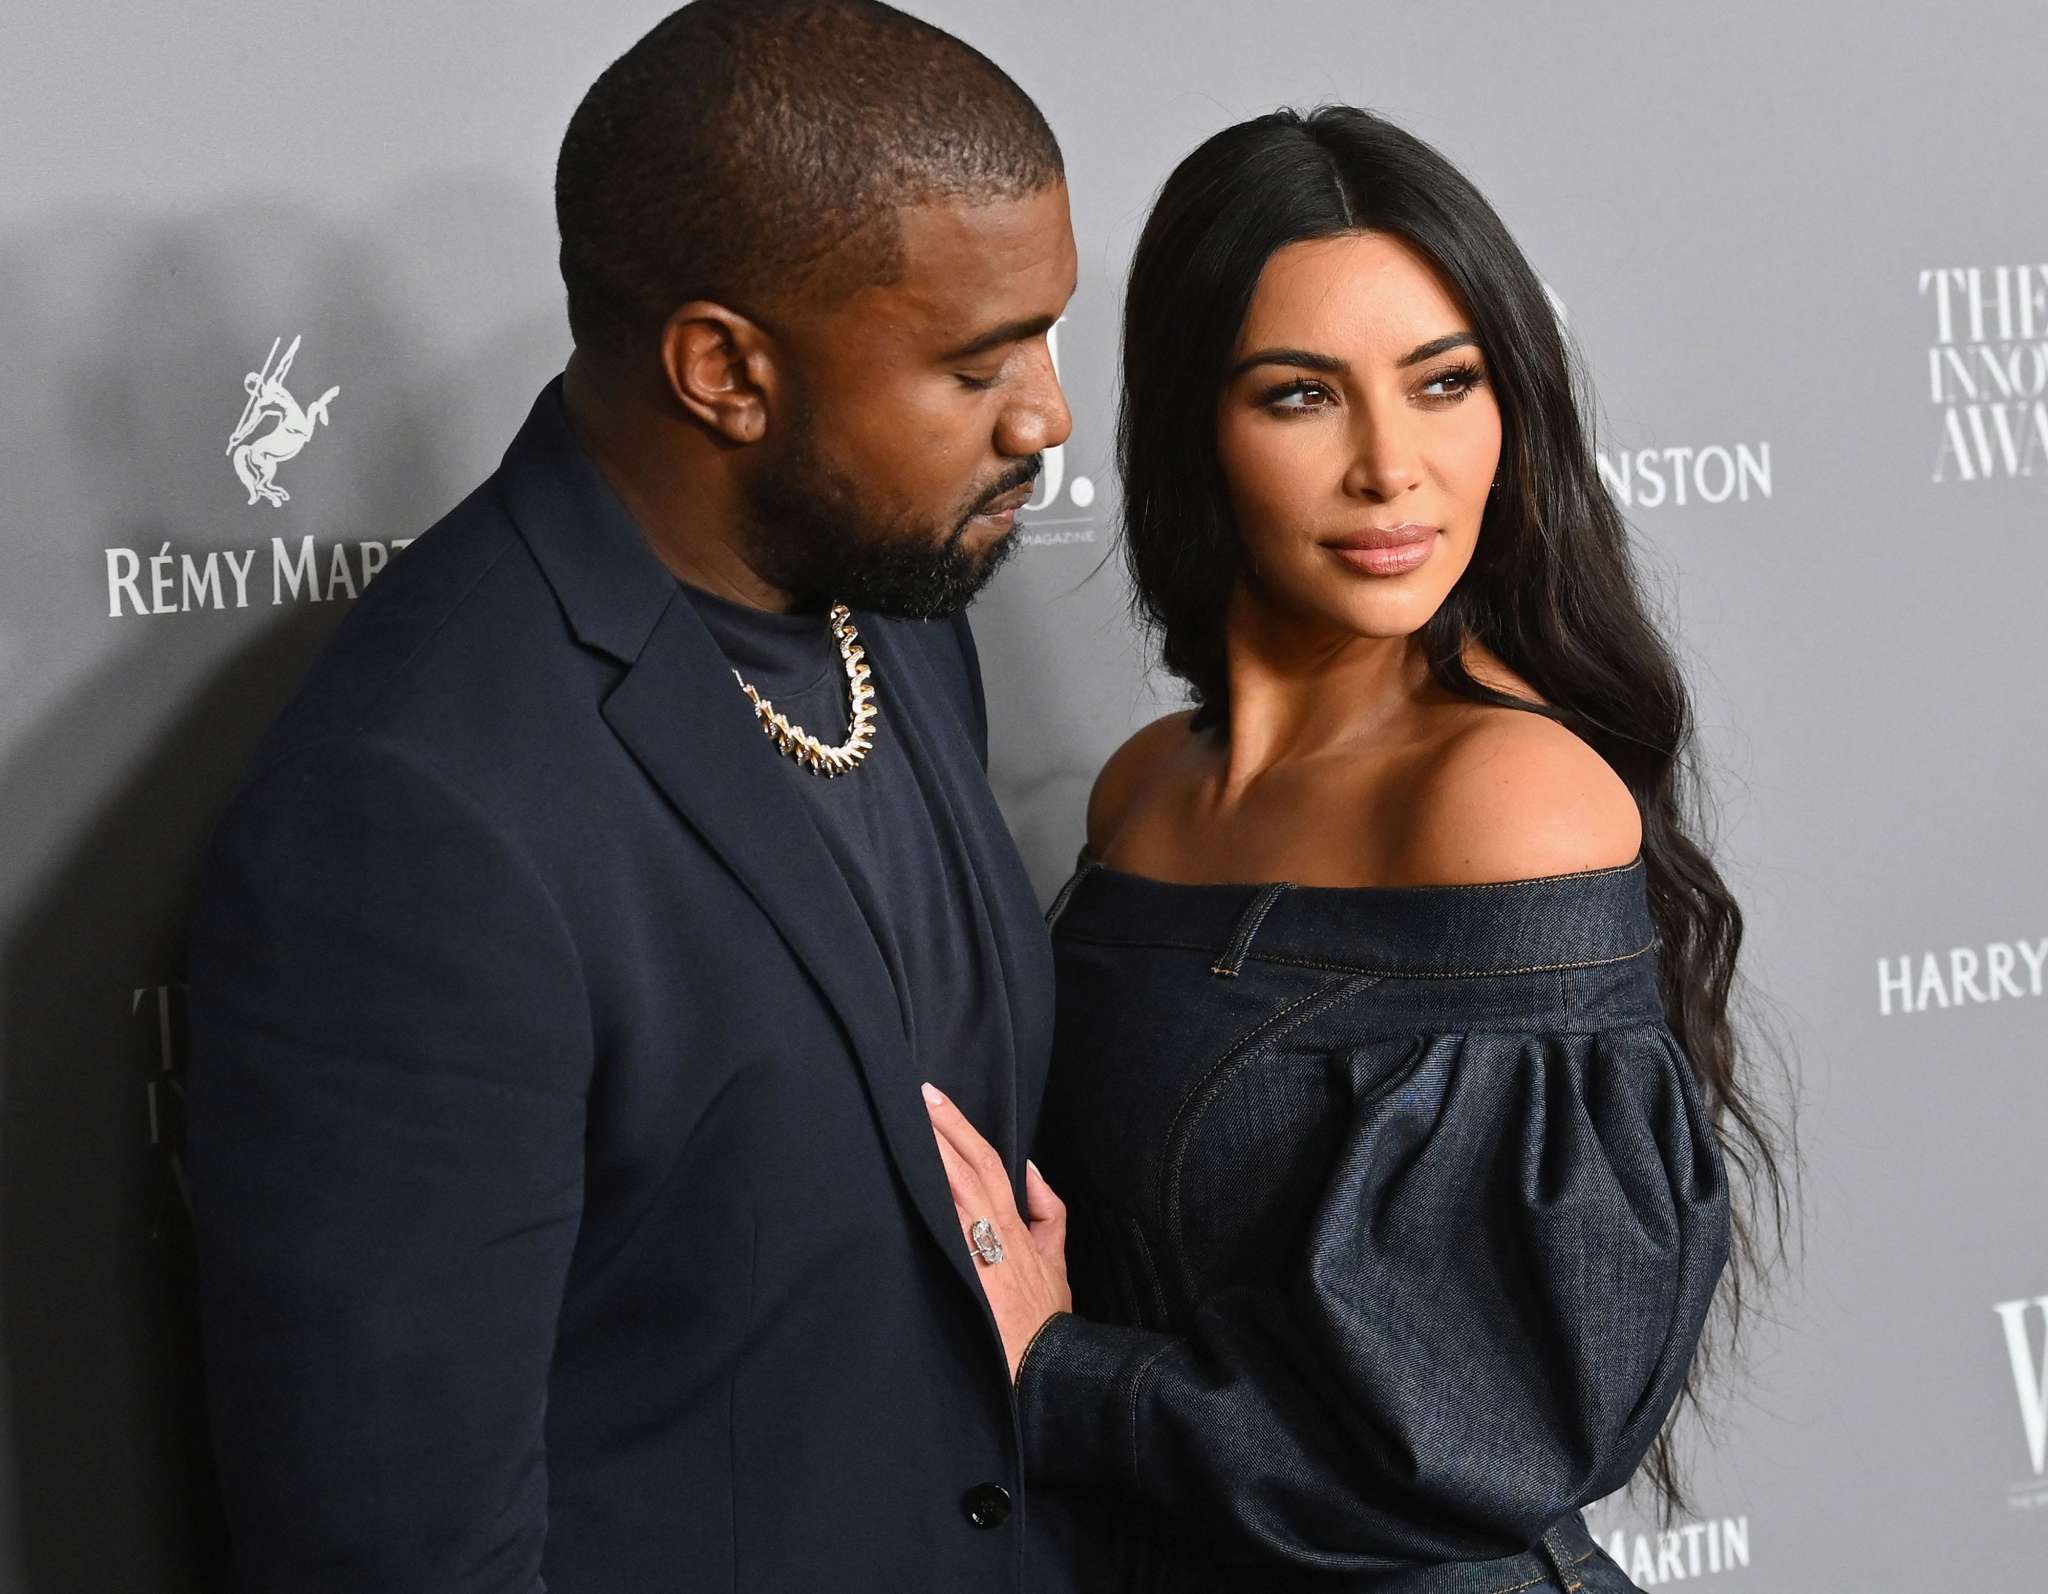 kanye-west-shocks-fans-with-this-move-what-does-kim-kardashian-feel-about-it